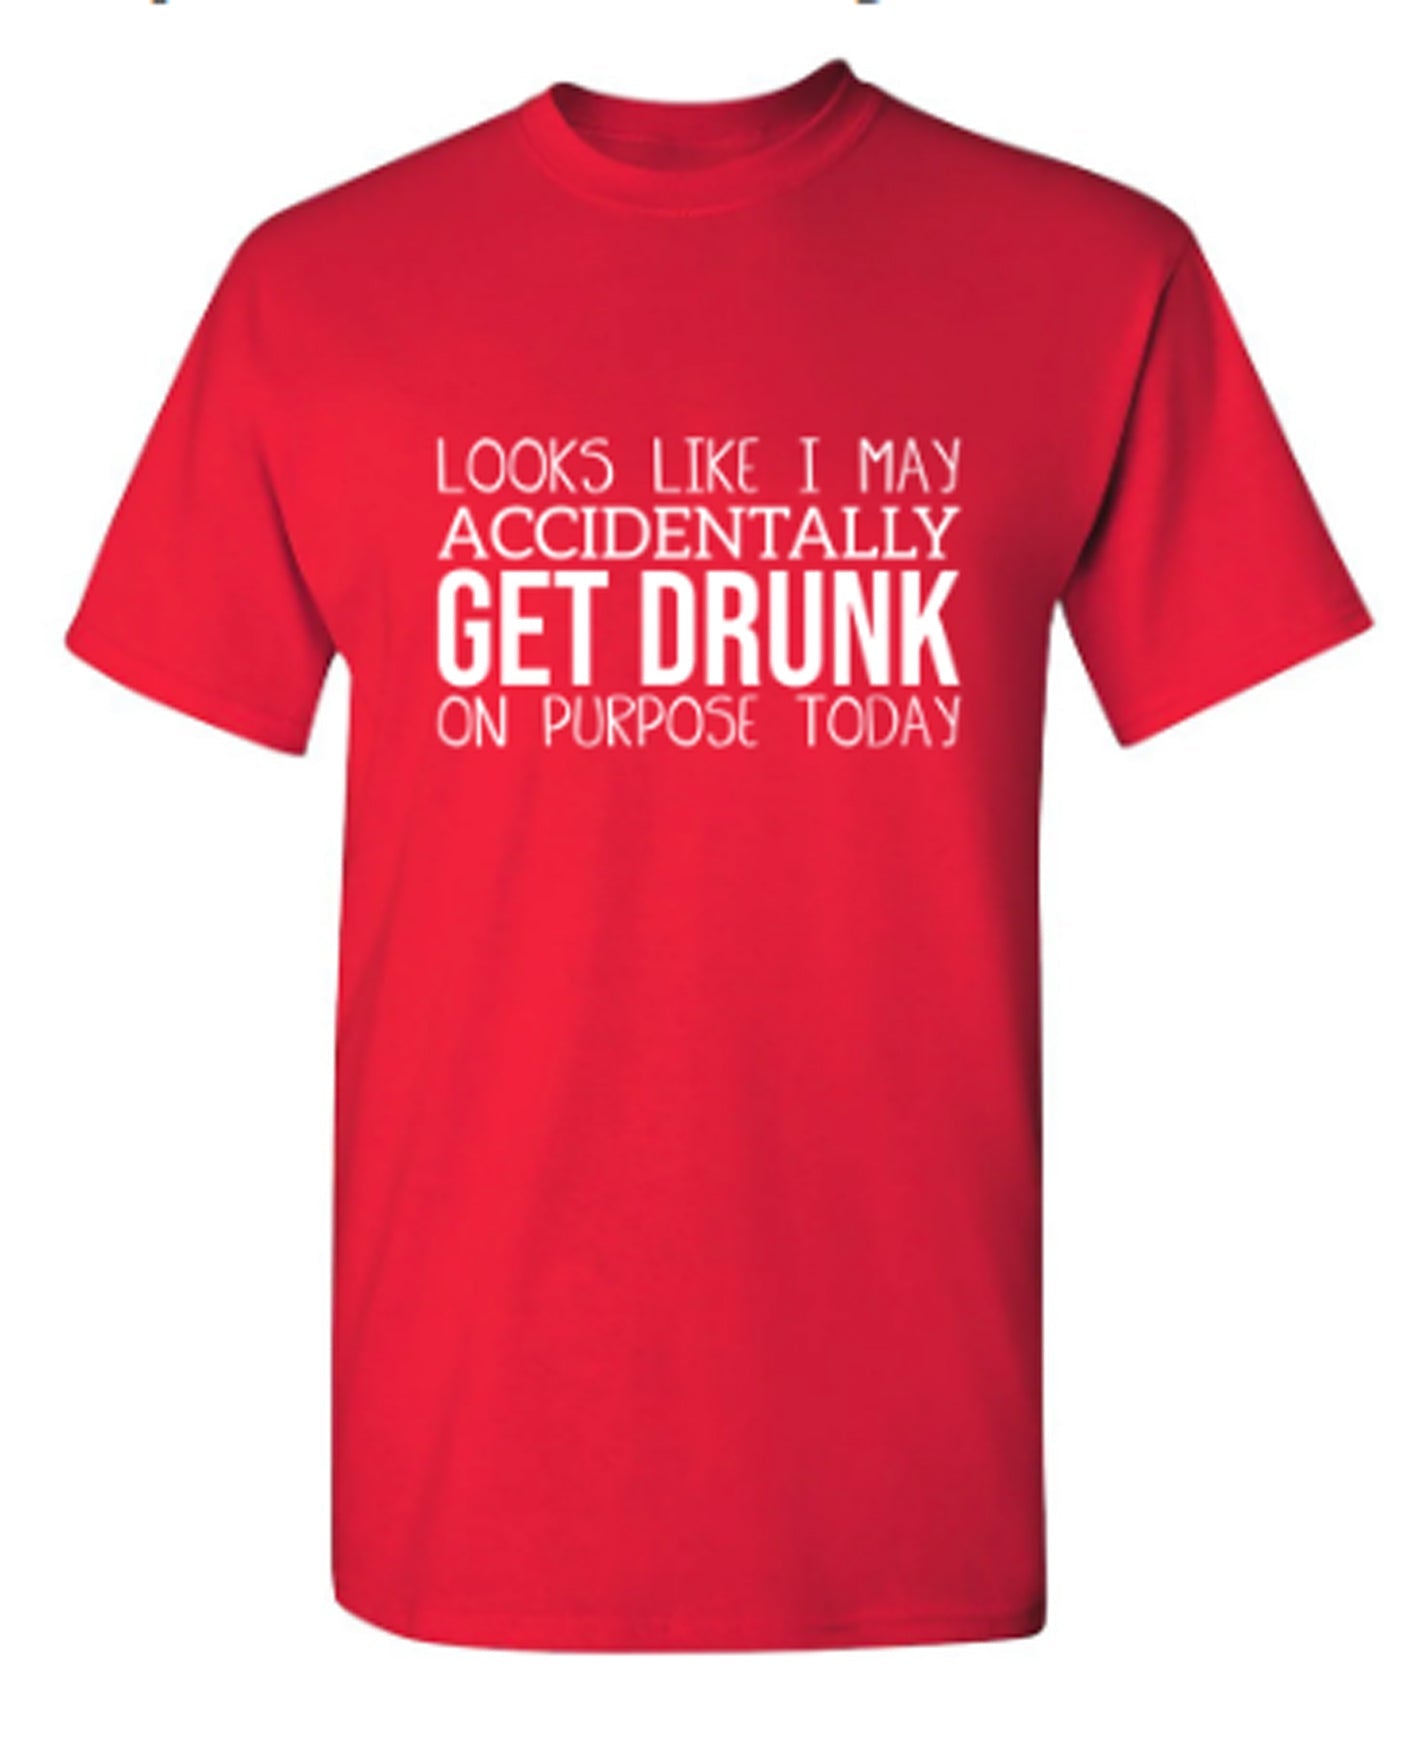 It Looks Like I Make Accidentally Get Drunk On Purpose Today - Funny T Shirts & Graphic Tees